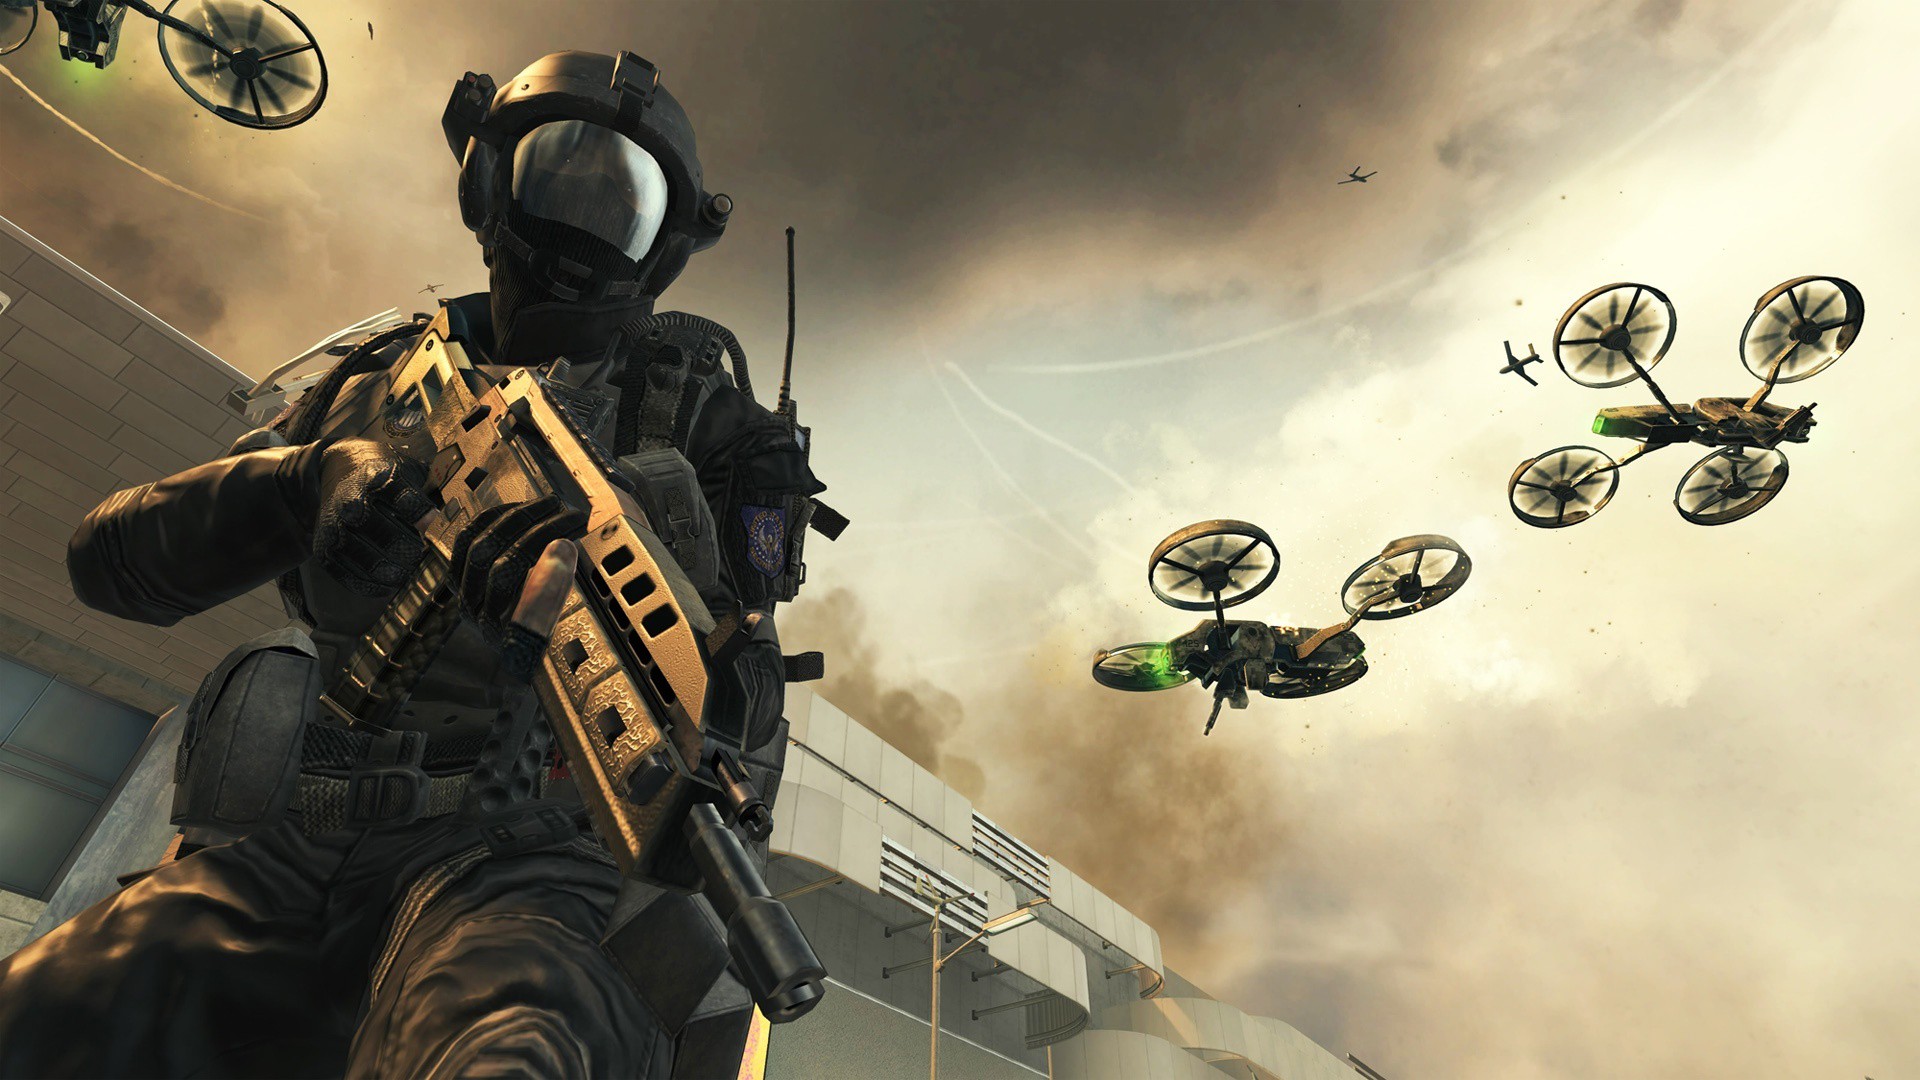 EXCLUSIVE – Call of Duty 2025 is a semi-futuristic sequel to Black Ops 2